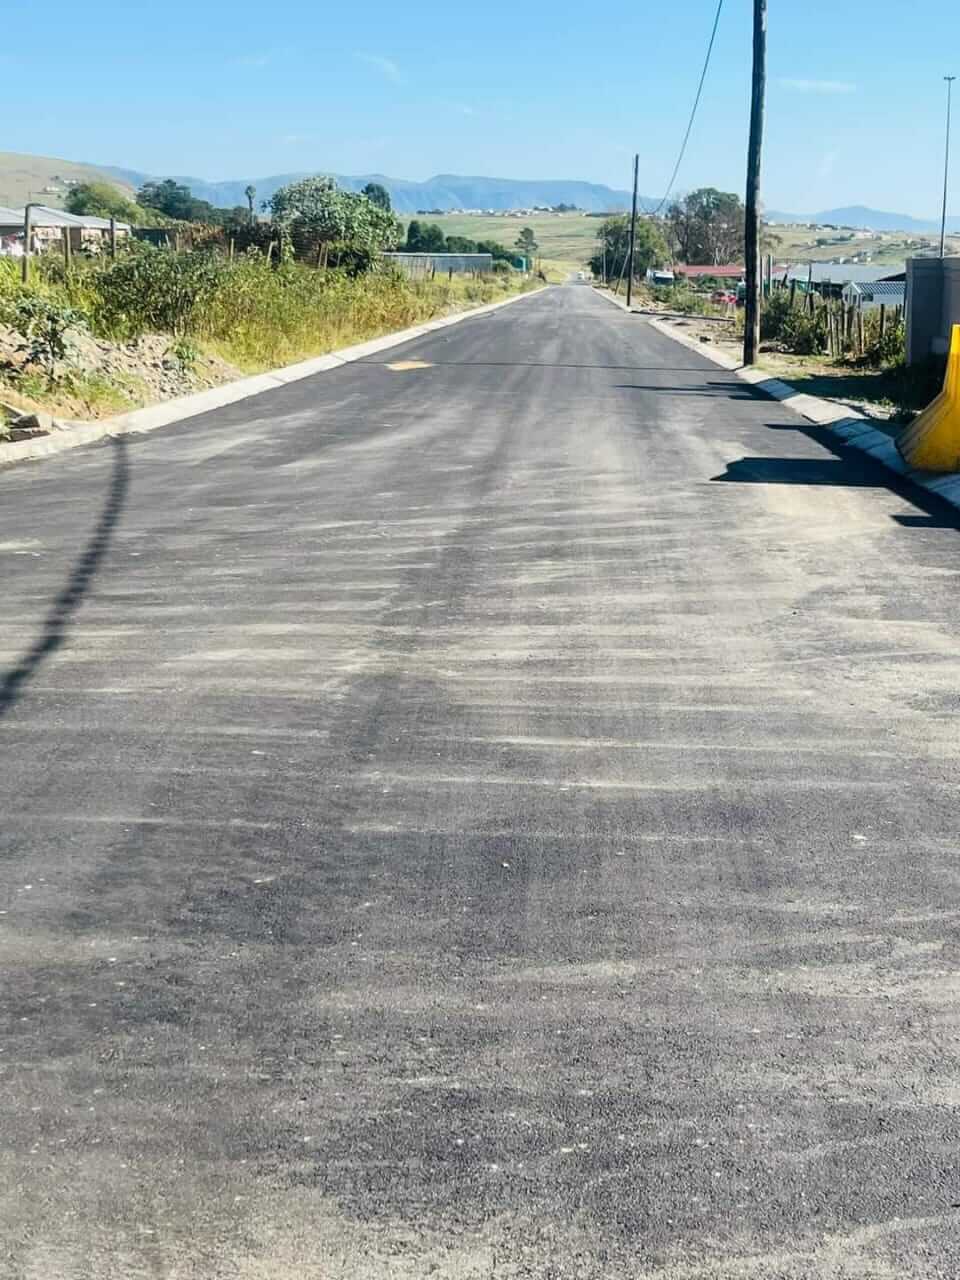 NTABANKULU ROADS ARE REVAMPED AMIDST UPCOMING ELECTIONS